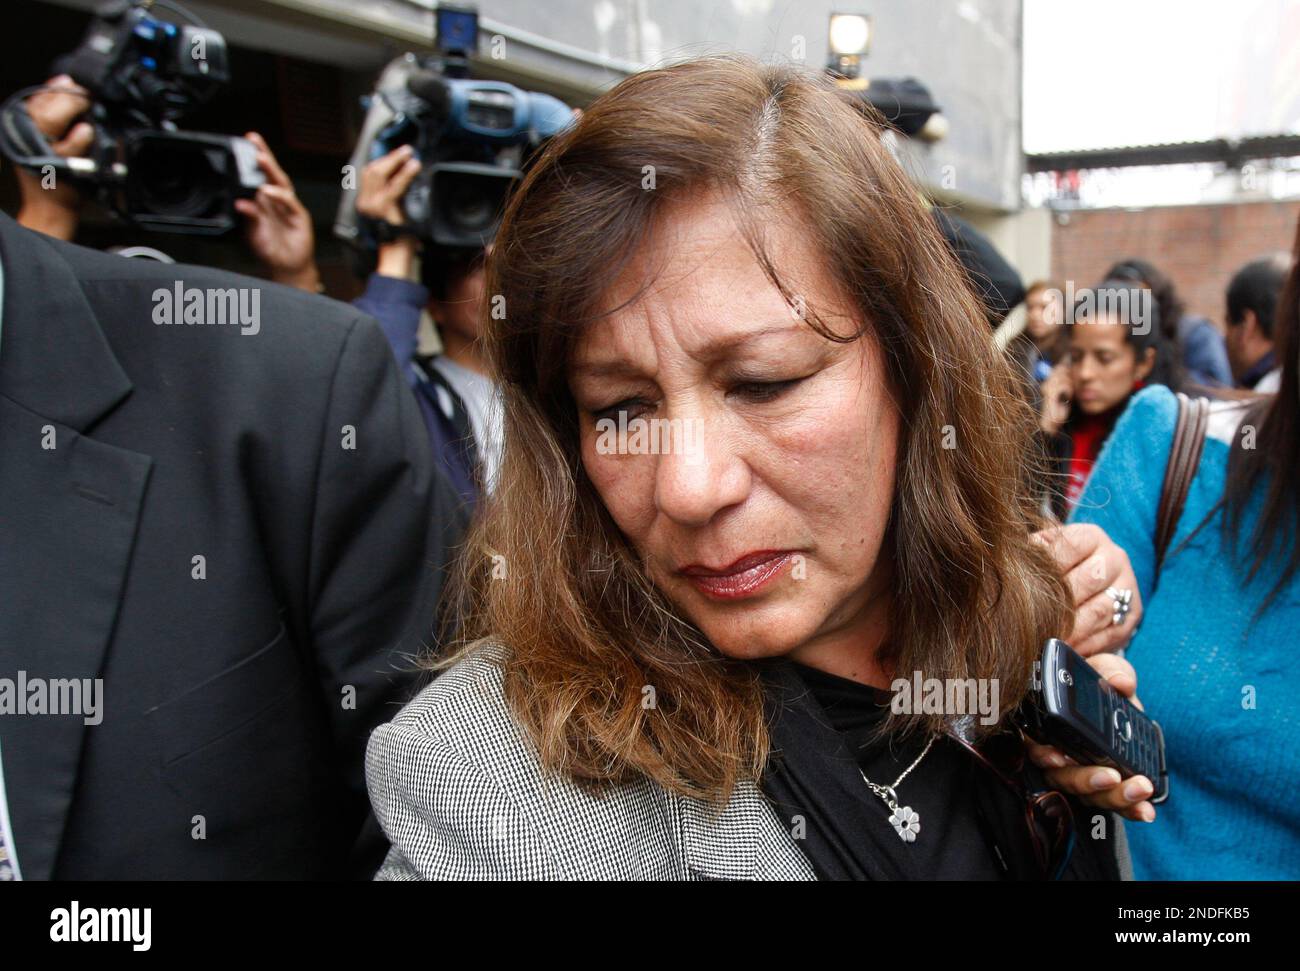 Elvira Pelaez, sister of Vicky Pelaez, leaves after a press conference at RPP radio station in Lima, Wednesday, June 30, 2010. Peruvian journalist Vicky Pelaez was among 10 people arrested in a sweep in the United States on June 27 as part of an alleged Russian spy ring and charged with conspiracy to act as an agent of a foreign government without notifying the U.S. Attorney General, which carries a maximum penalty of five years in prison upon conviction. (AP Photo/Karel Navarro) Stock Photo